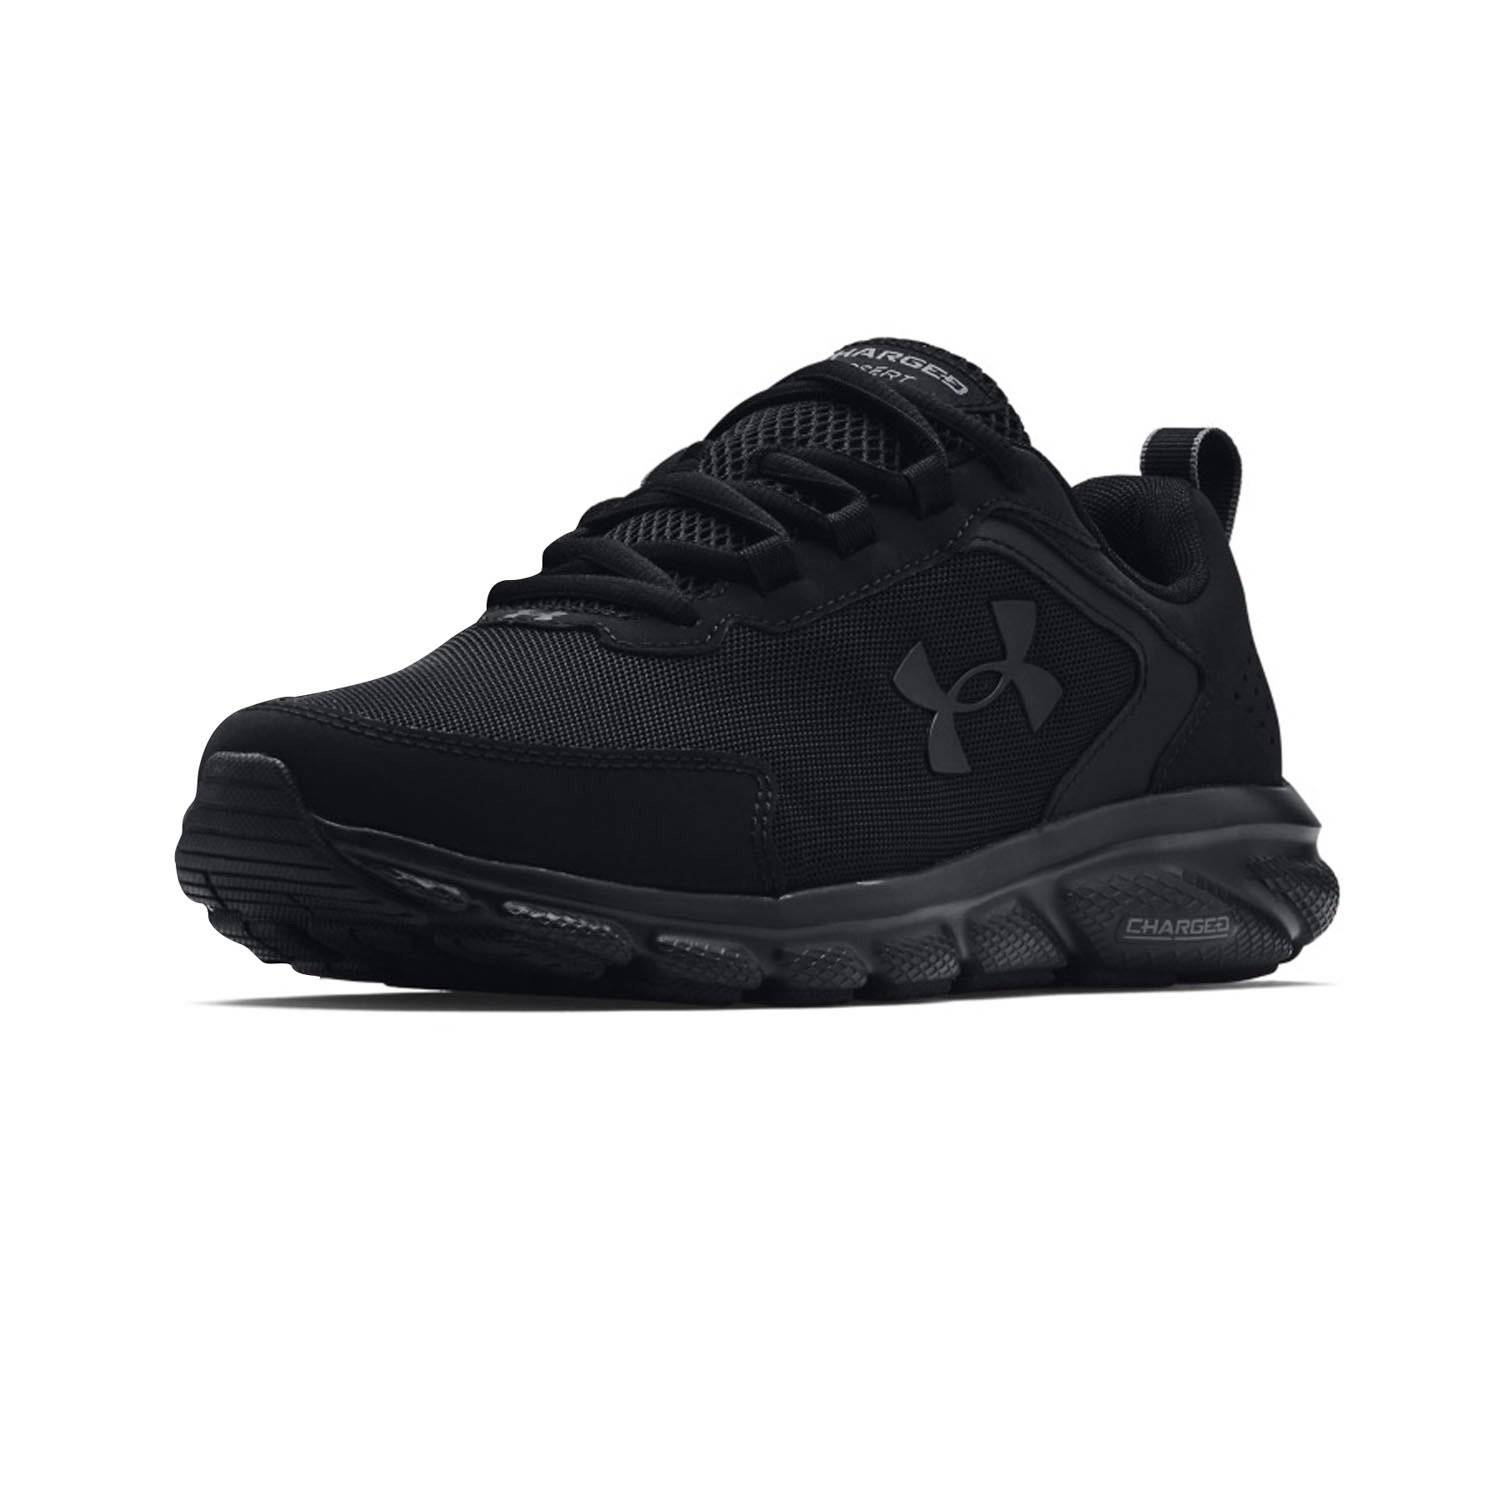 UNDER ARMOUR CHARGED ASSERT 9 RUNNING SHOES